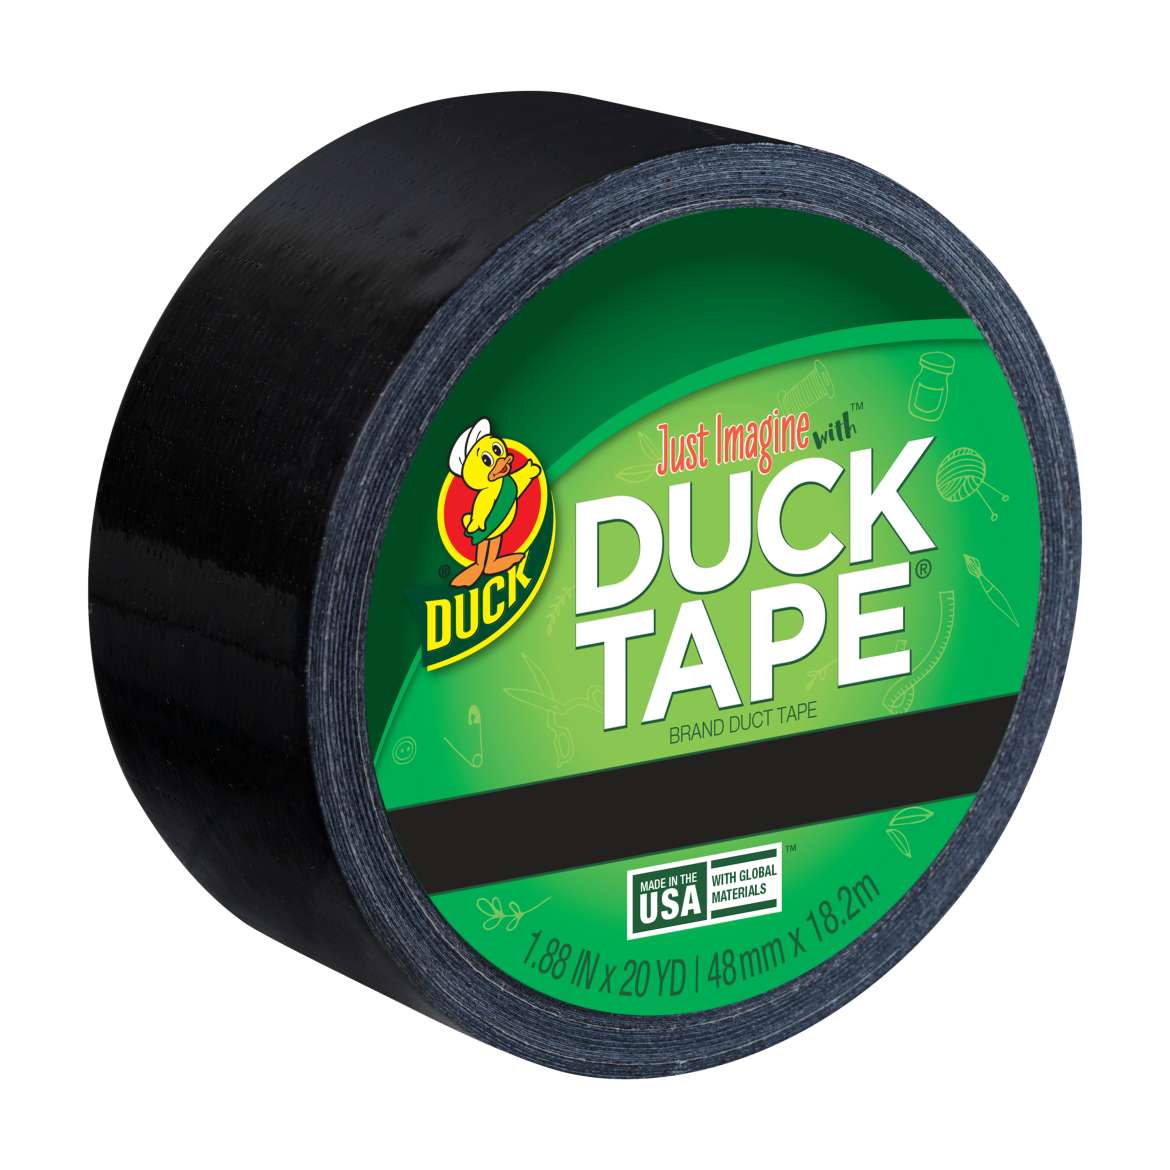 Color Duck Tape® Brand Duct Tape - Midnight Madness, 1.88 in. x 20 yd.